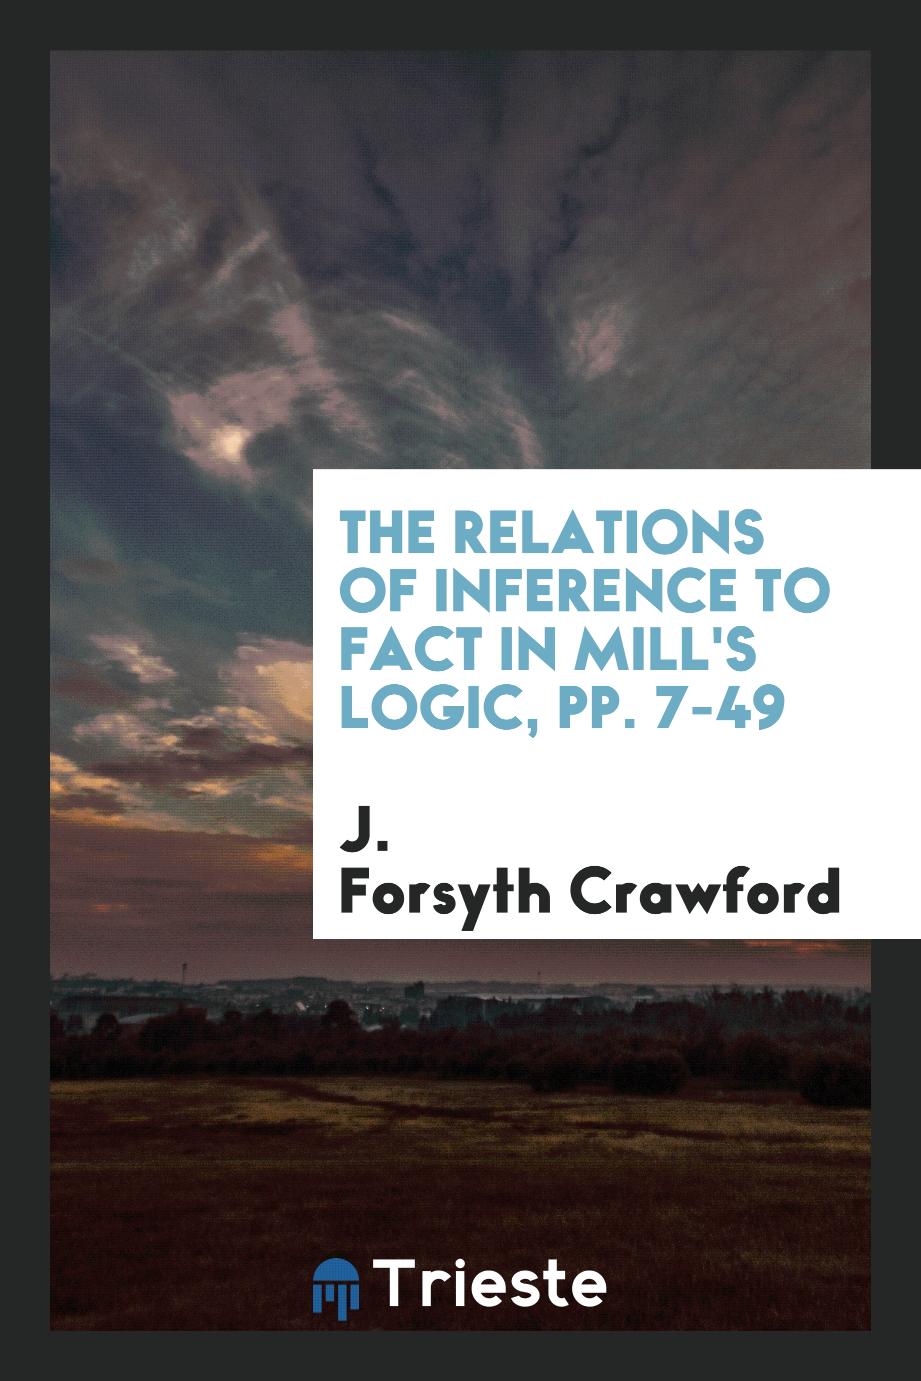 The Relations of Inference to Fact in Mill's Logic, pp. 7-49